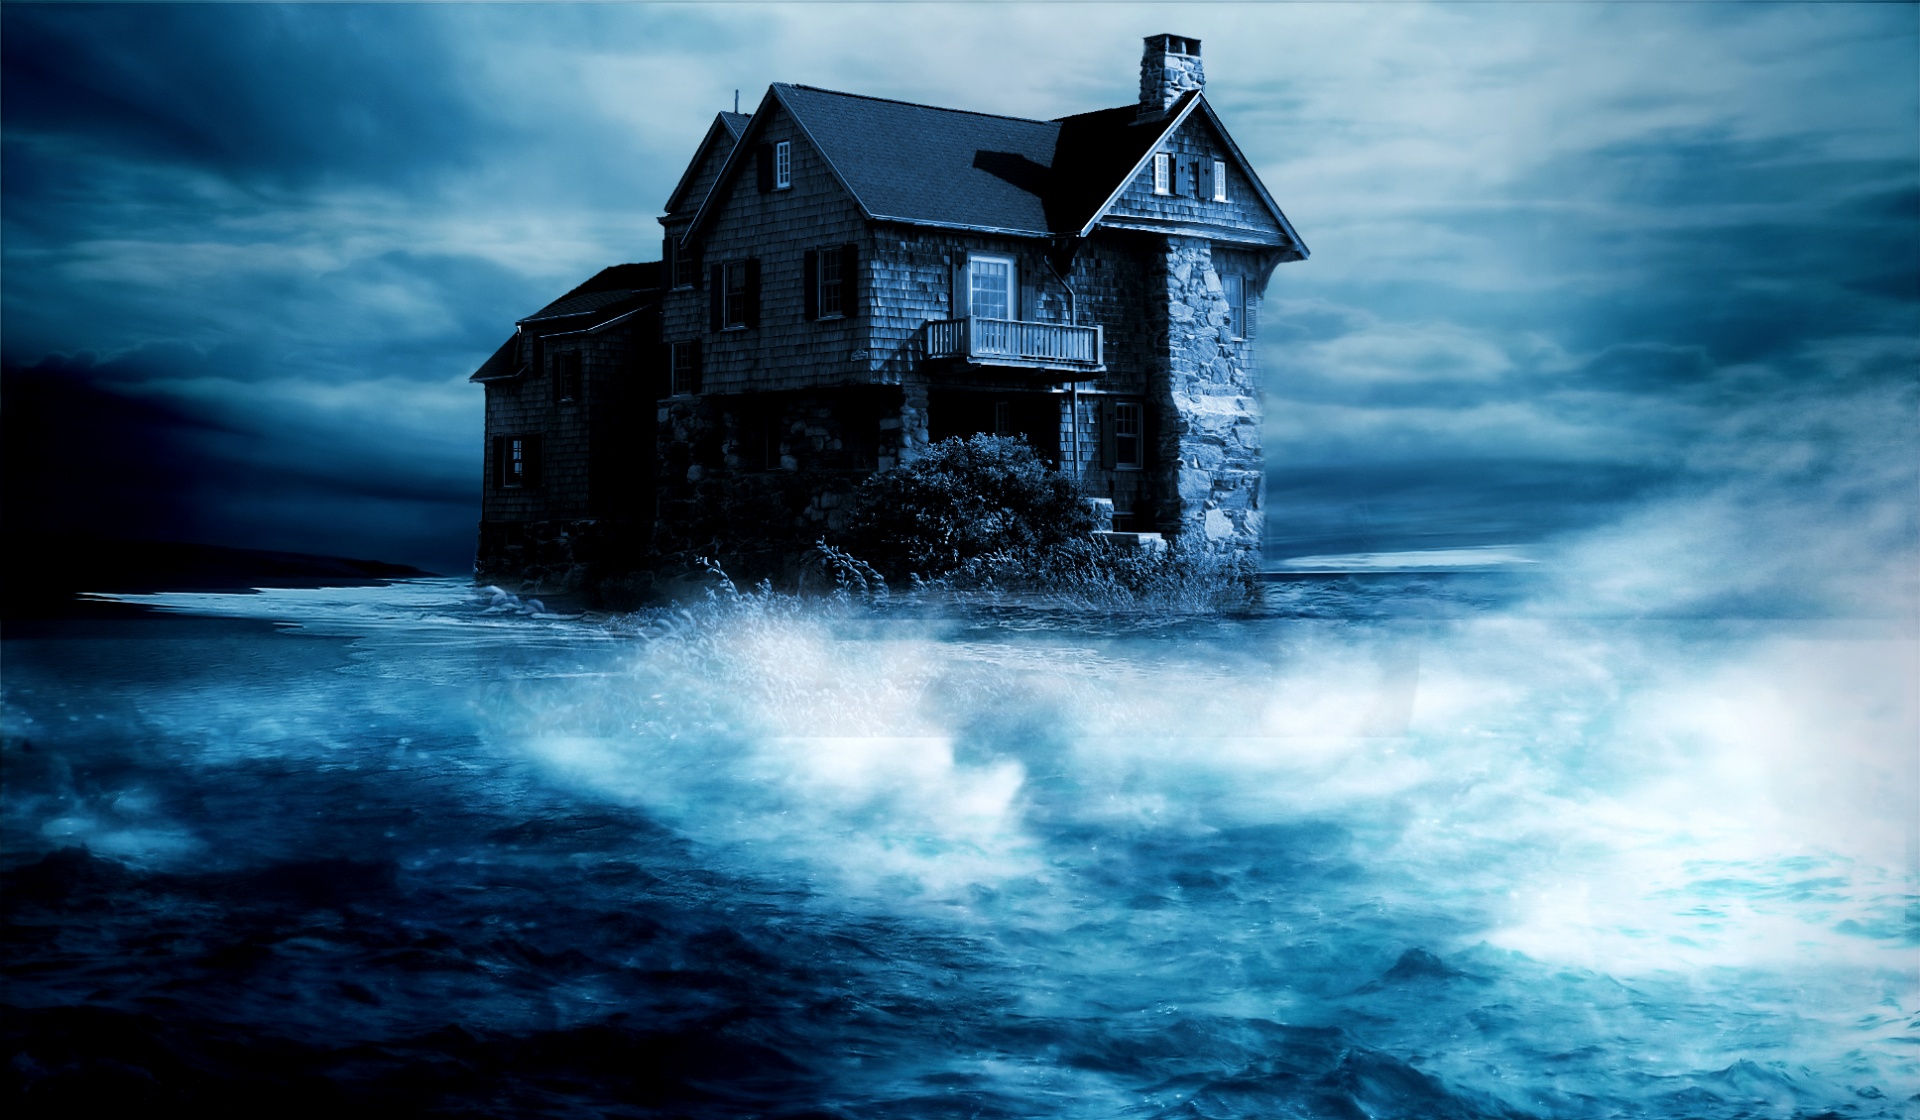 House in a storm